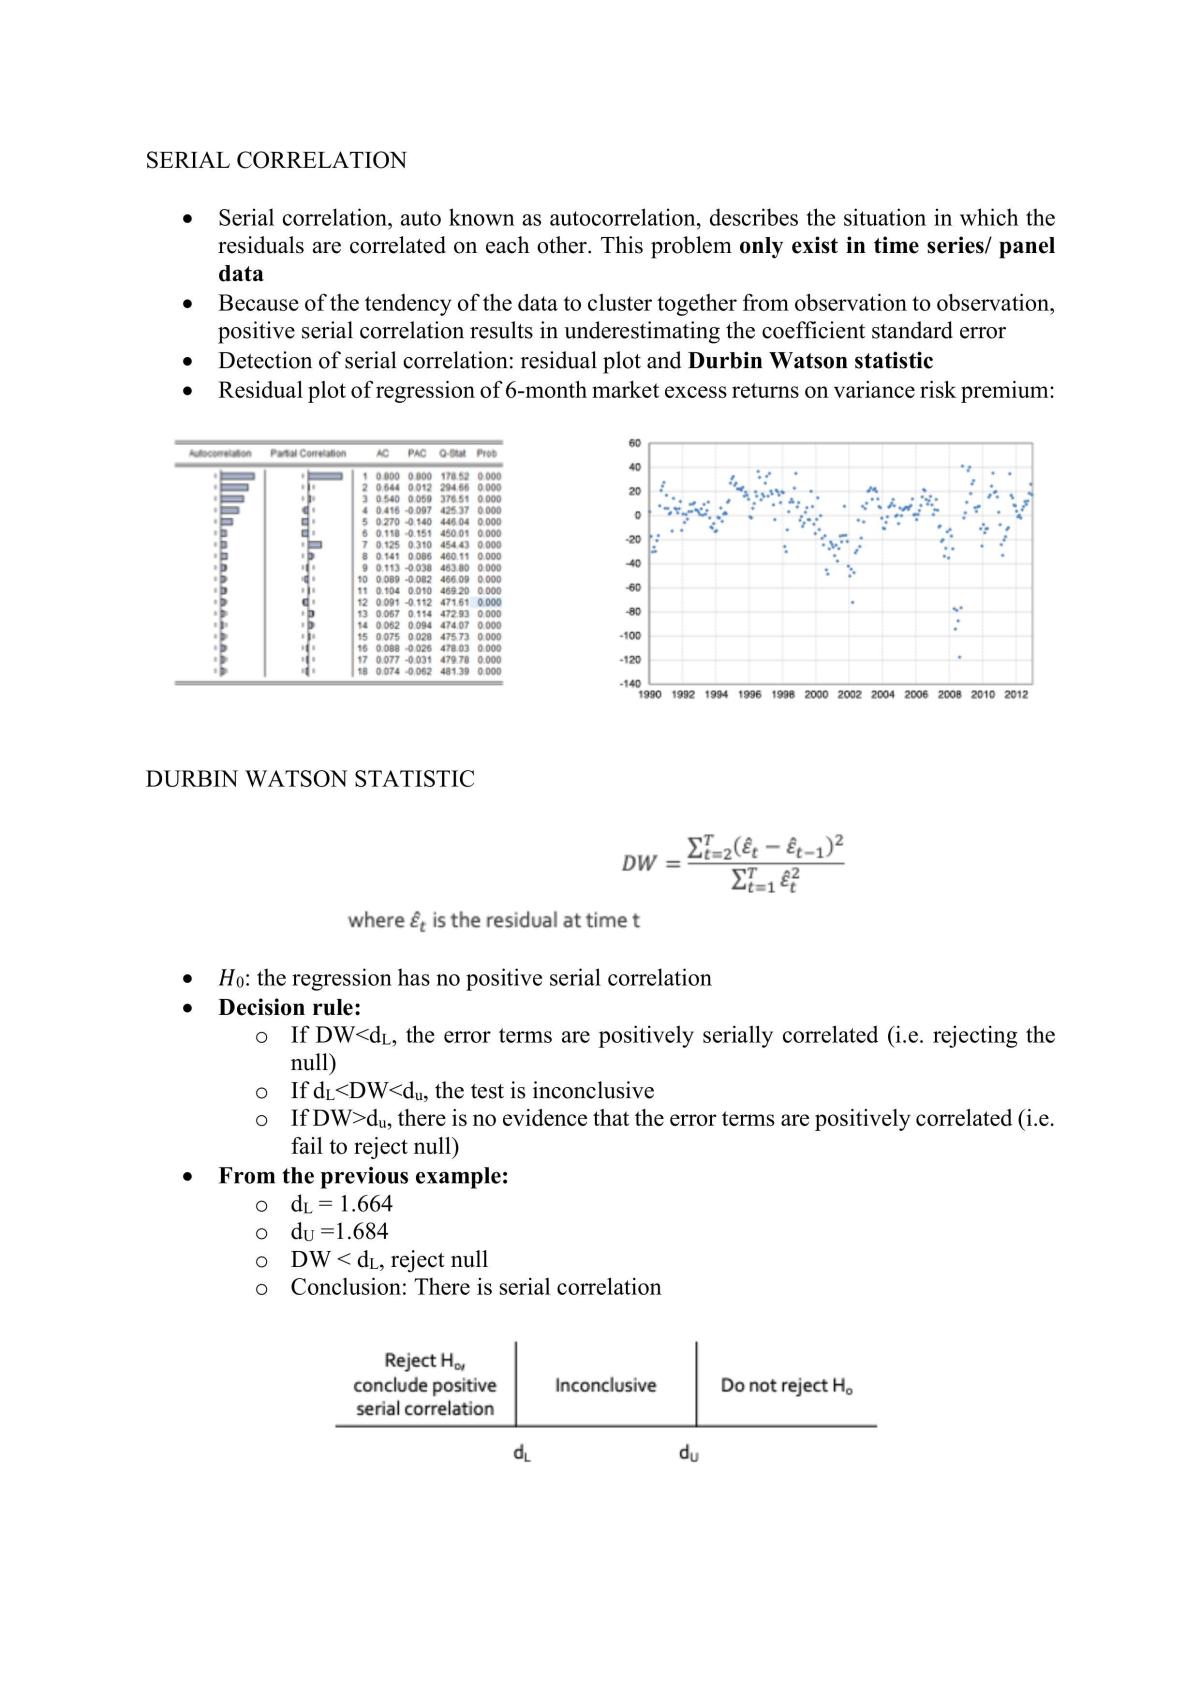 Research Methods lecture notes - Page 35